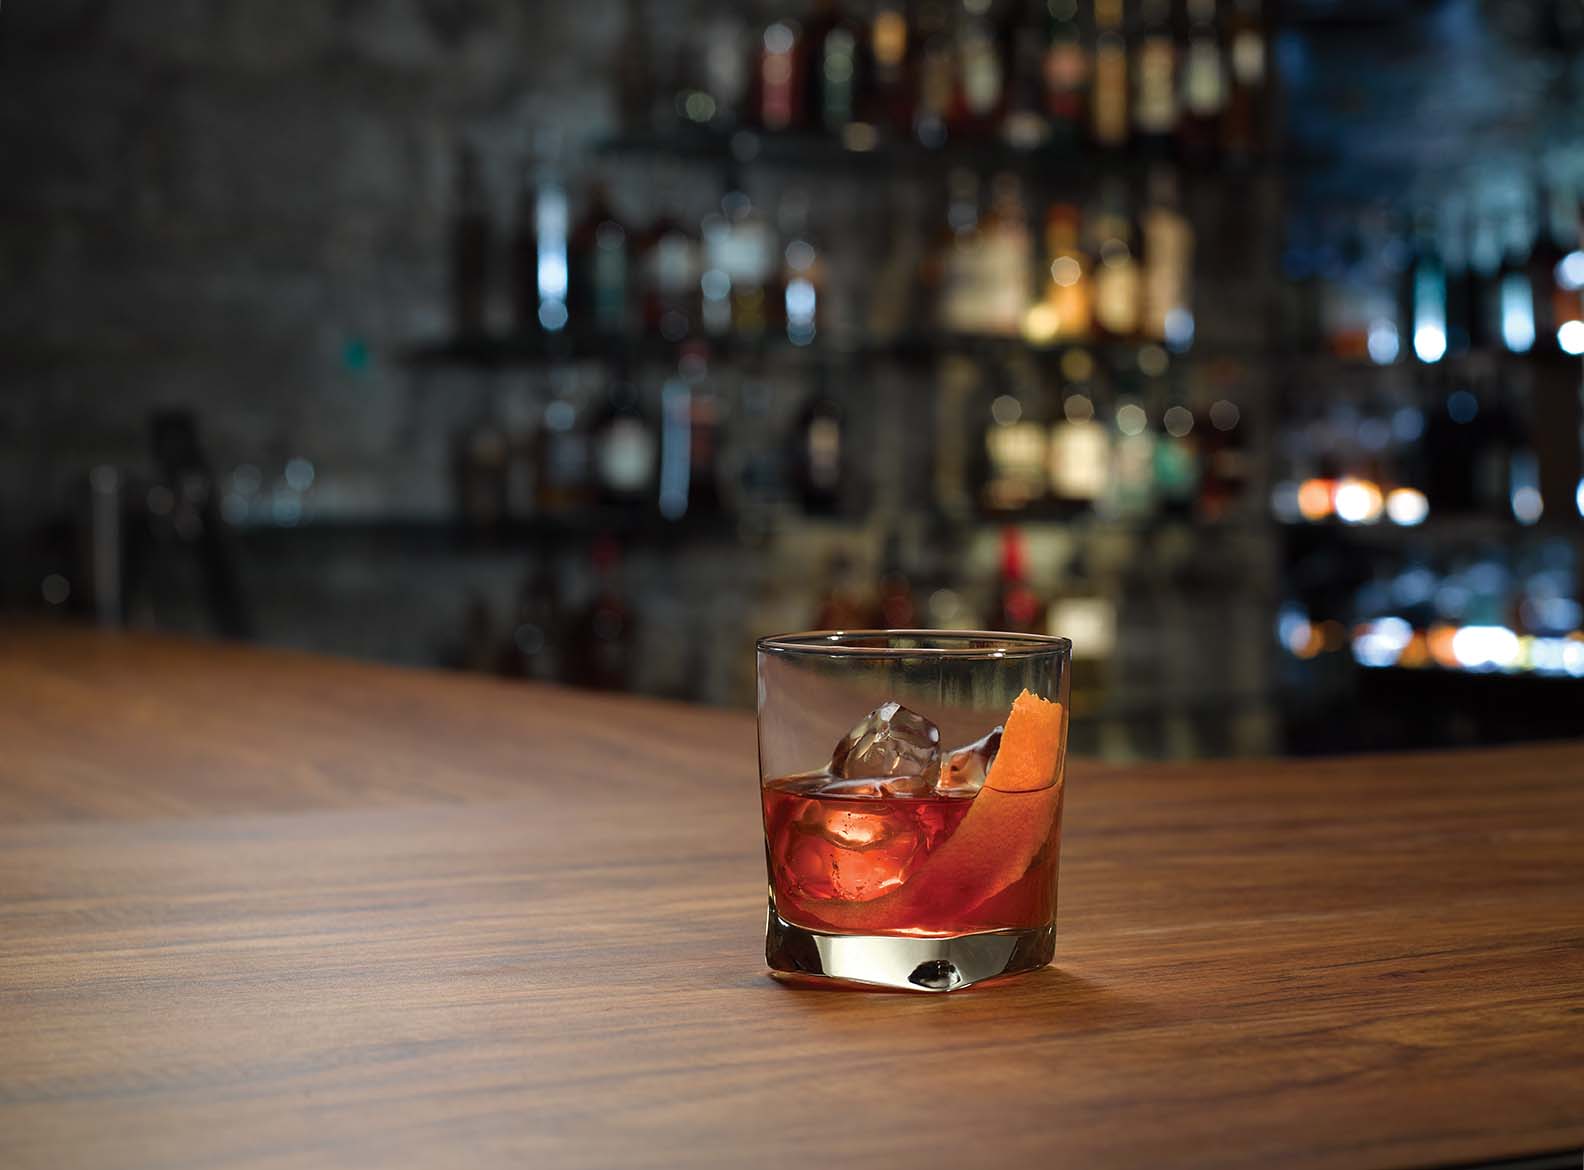 The Old Pals cocktail is sure to delight Negroni fans.